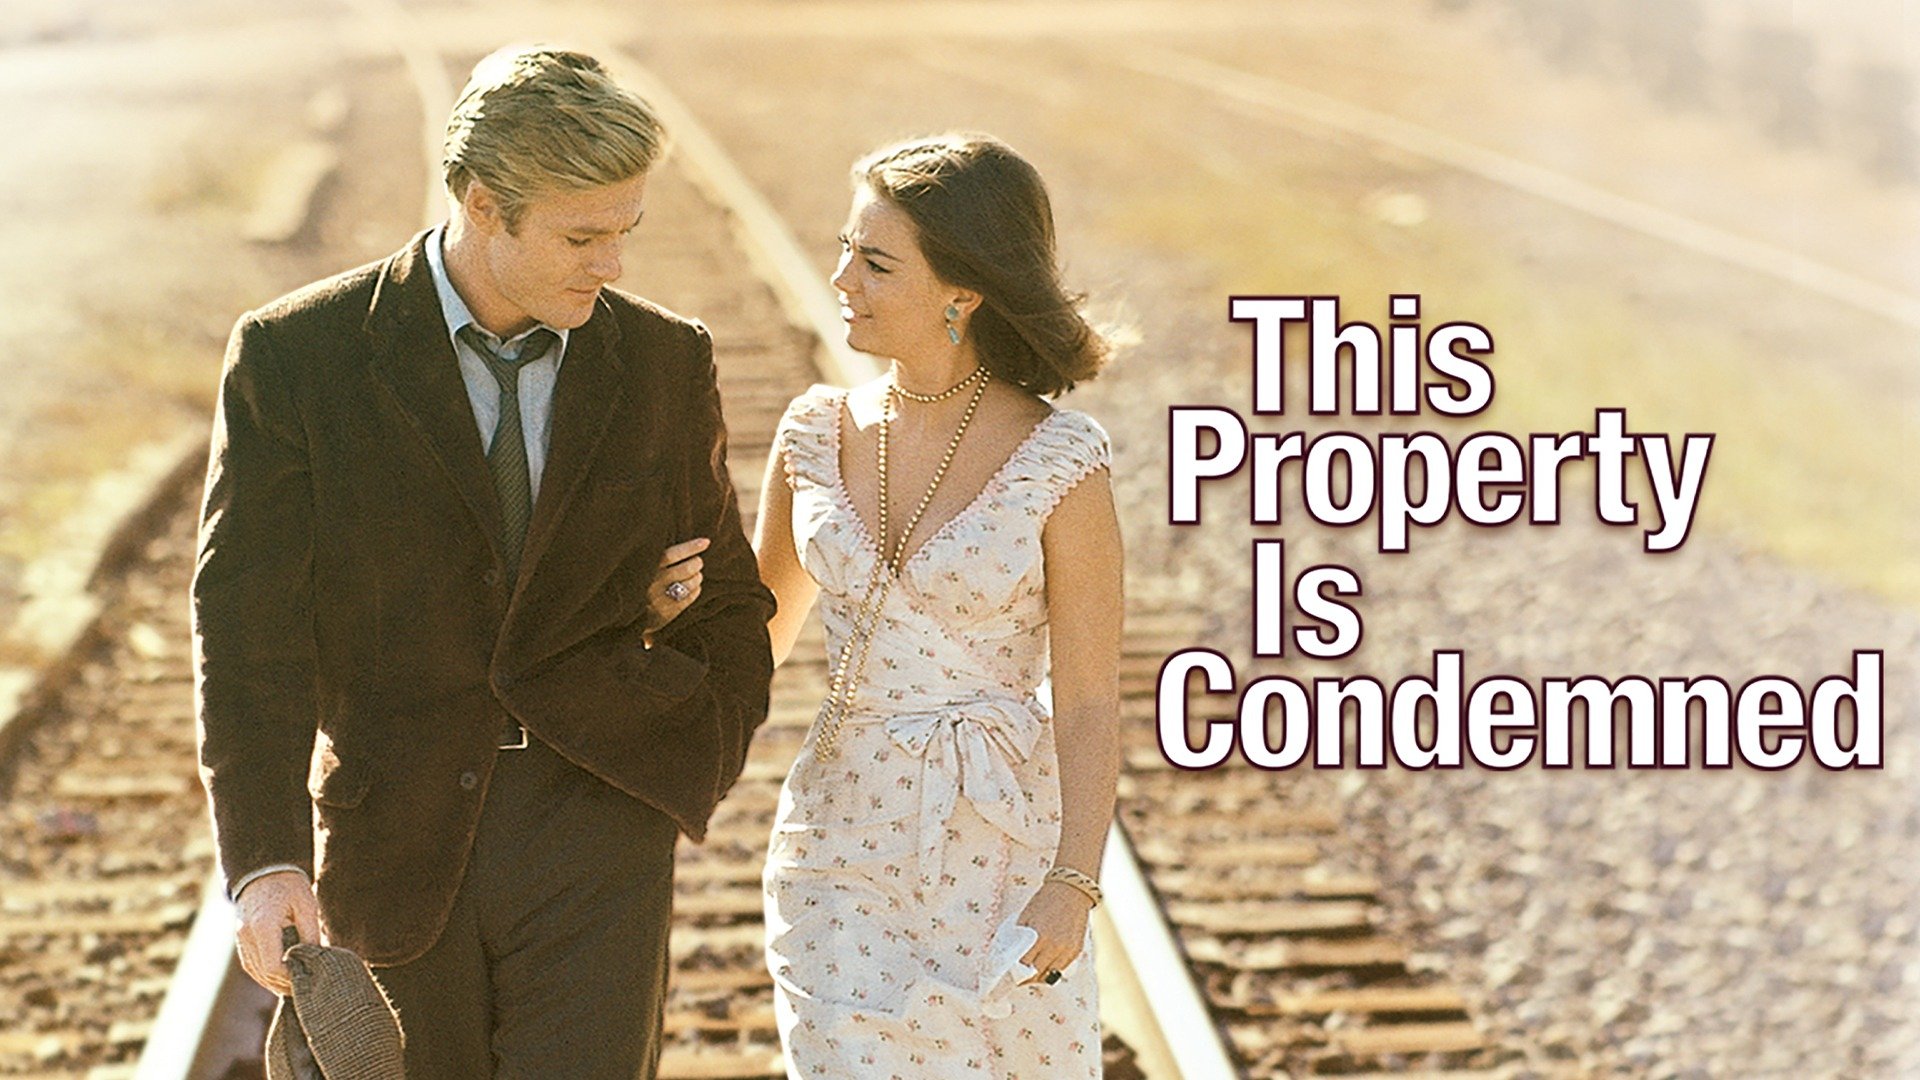 this property is condemned poster